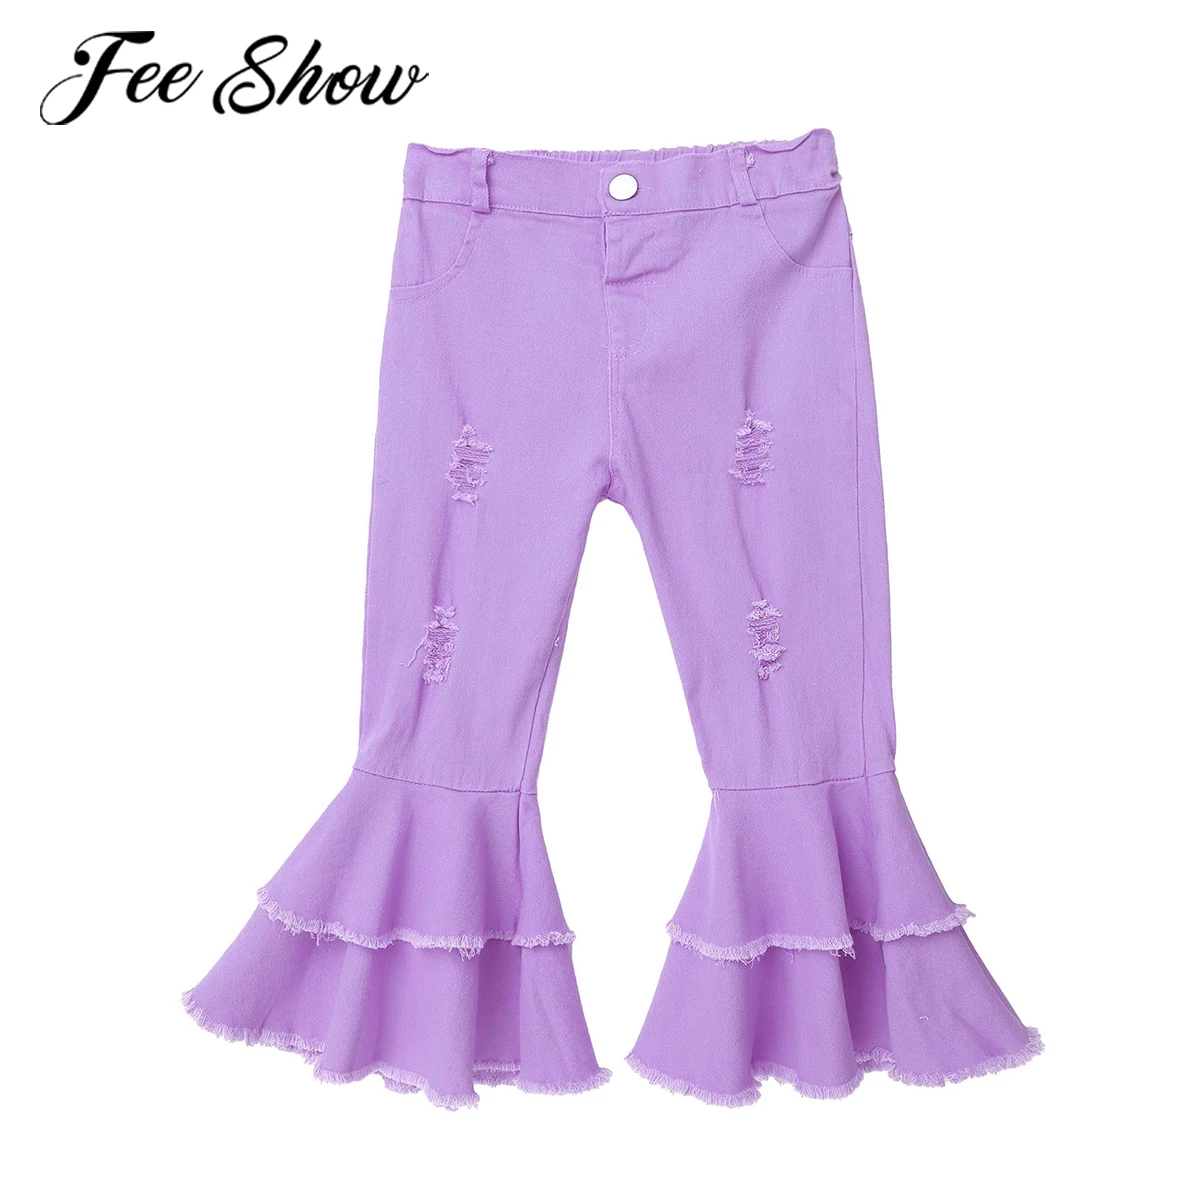 

New Girls Ripped Jeans Fashion Flare Pants Pure Color Toddler Girl Jeans Elastic Waistband Layered Flared Trousers Kids Pants